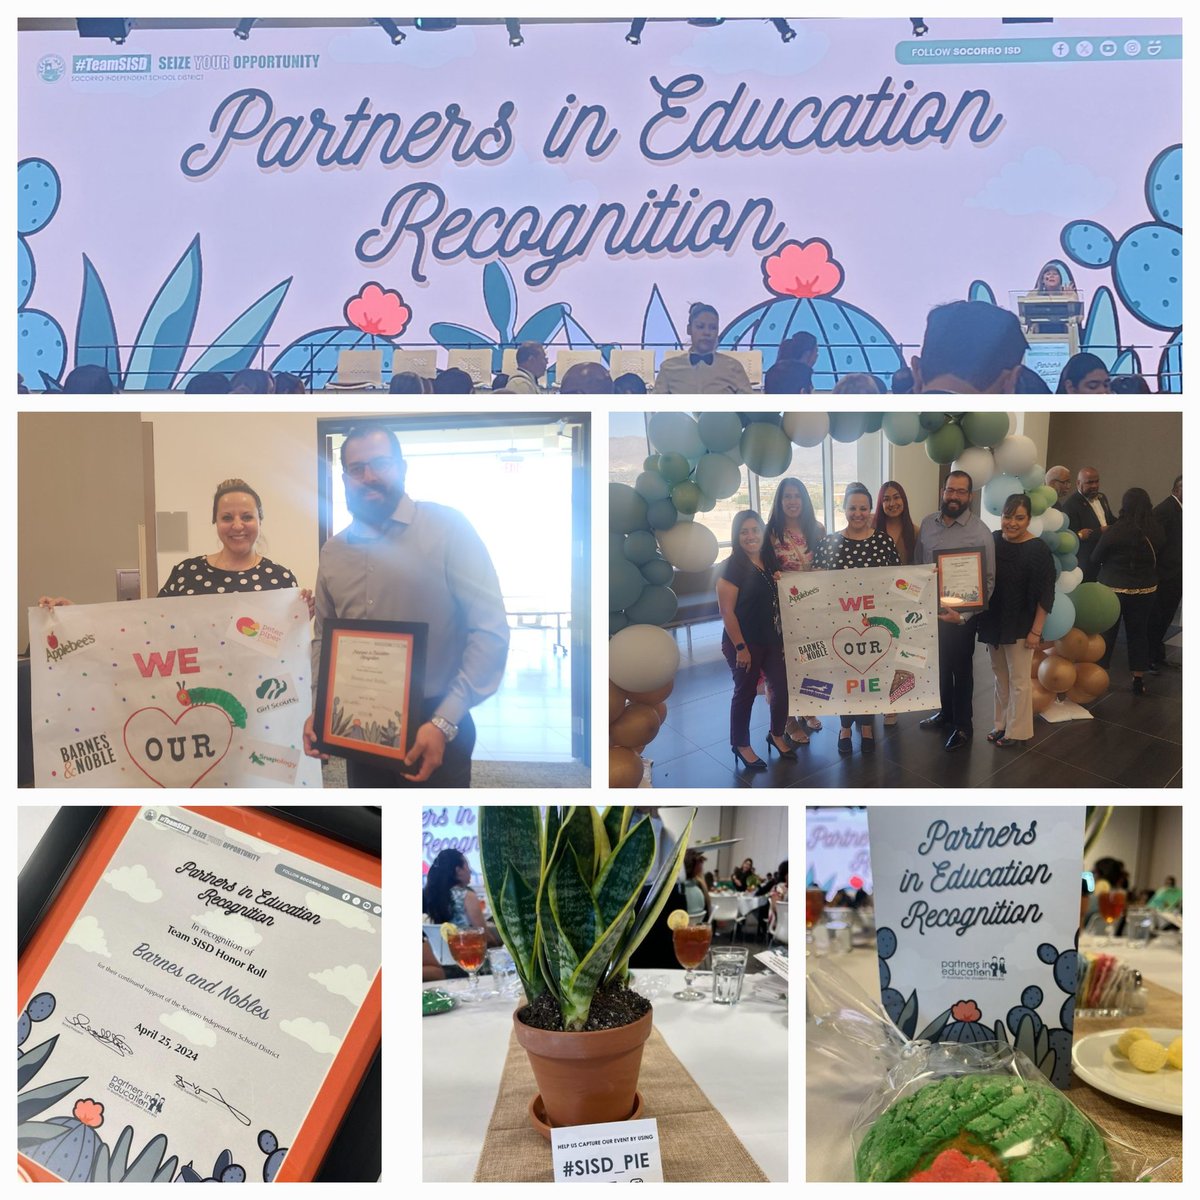 We ❤️ our SISD Partners in Education. Congratulations to all our amazing Partners In Education especially, Barnes and Nobles, Peter Piper, Snapology, Applebee's, Chick-fil-A, and Bahamas Bucks. We are so grateful for all they do for our Wranglers. #SISD_PIE #TeamSISD